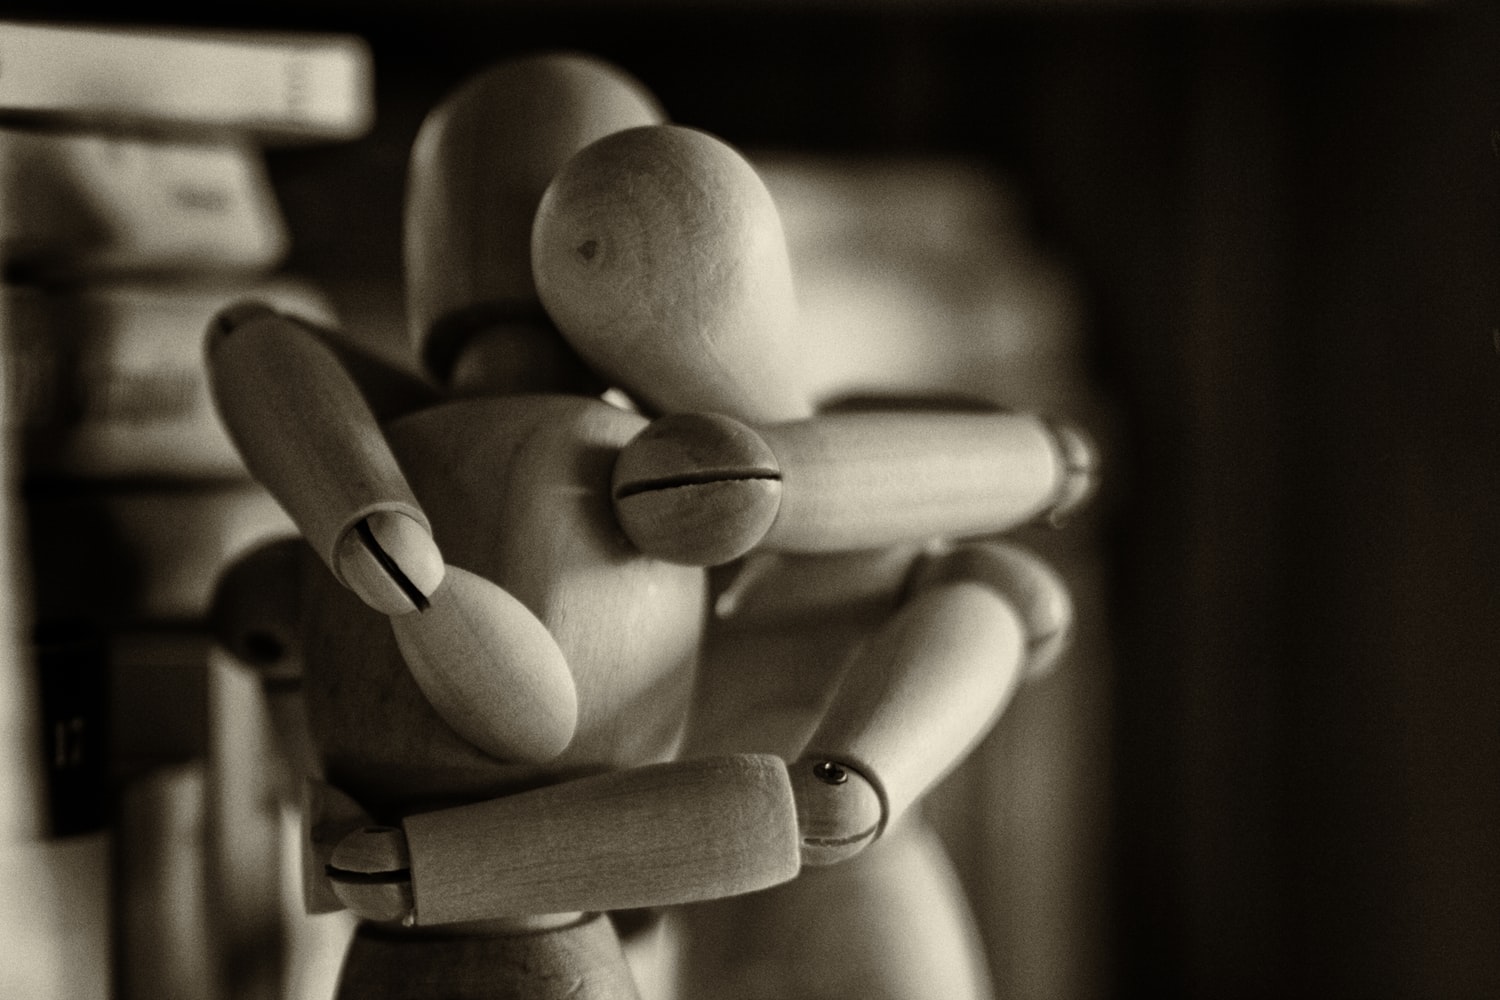 Image of a wooden articulated art mannequin embracing